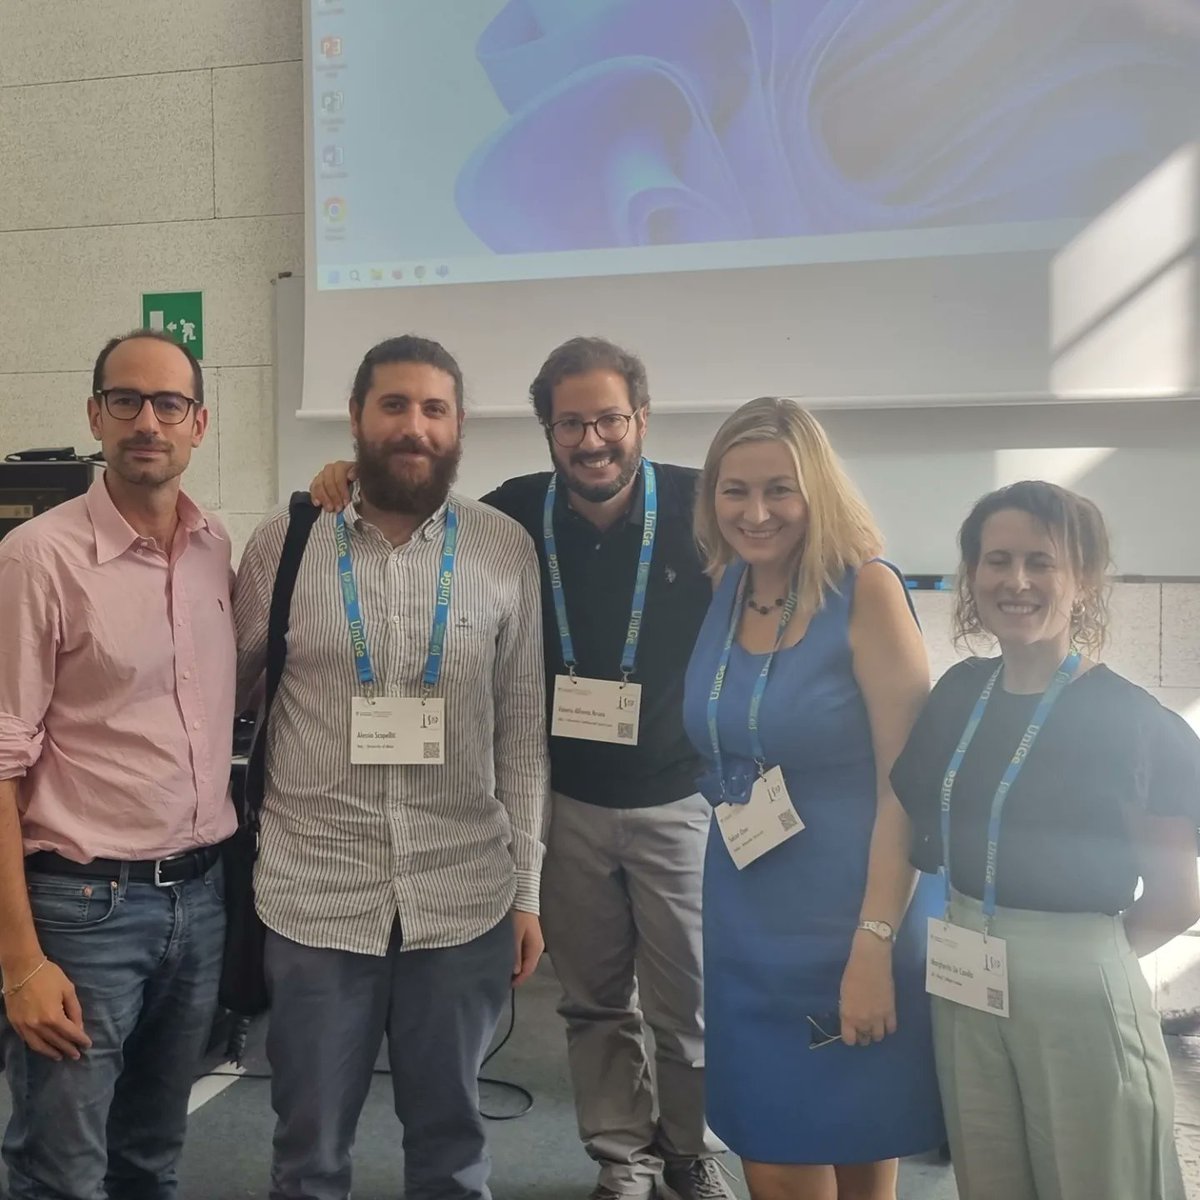 After the panel 'An Ideological Re-alignment of European Far-right and Conservative Parties at the Time of the Russia-Ukraine War?' #SISP2023
@ValerioA_Bruno 
@AlessioScopell5 
Edoardo Bressanelli
Margherita de Candia